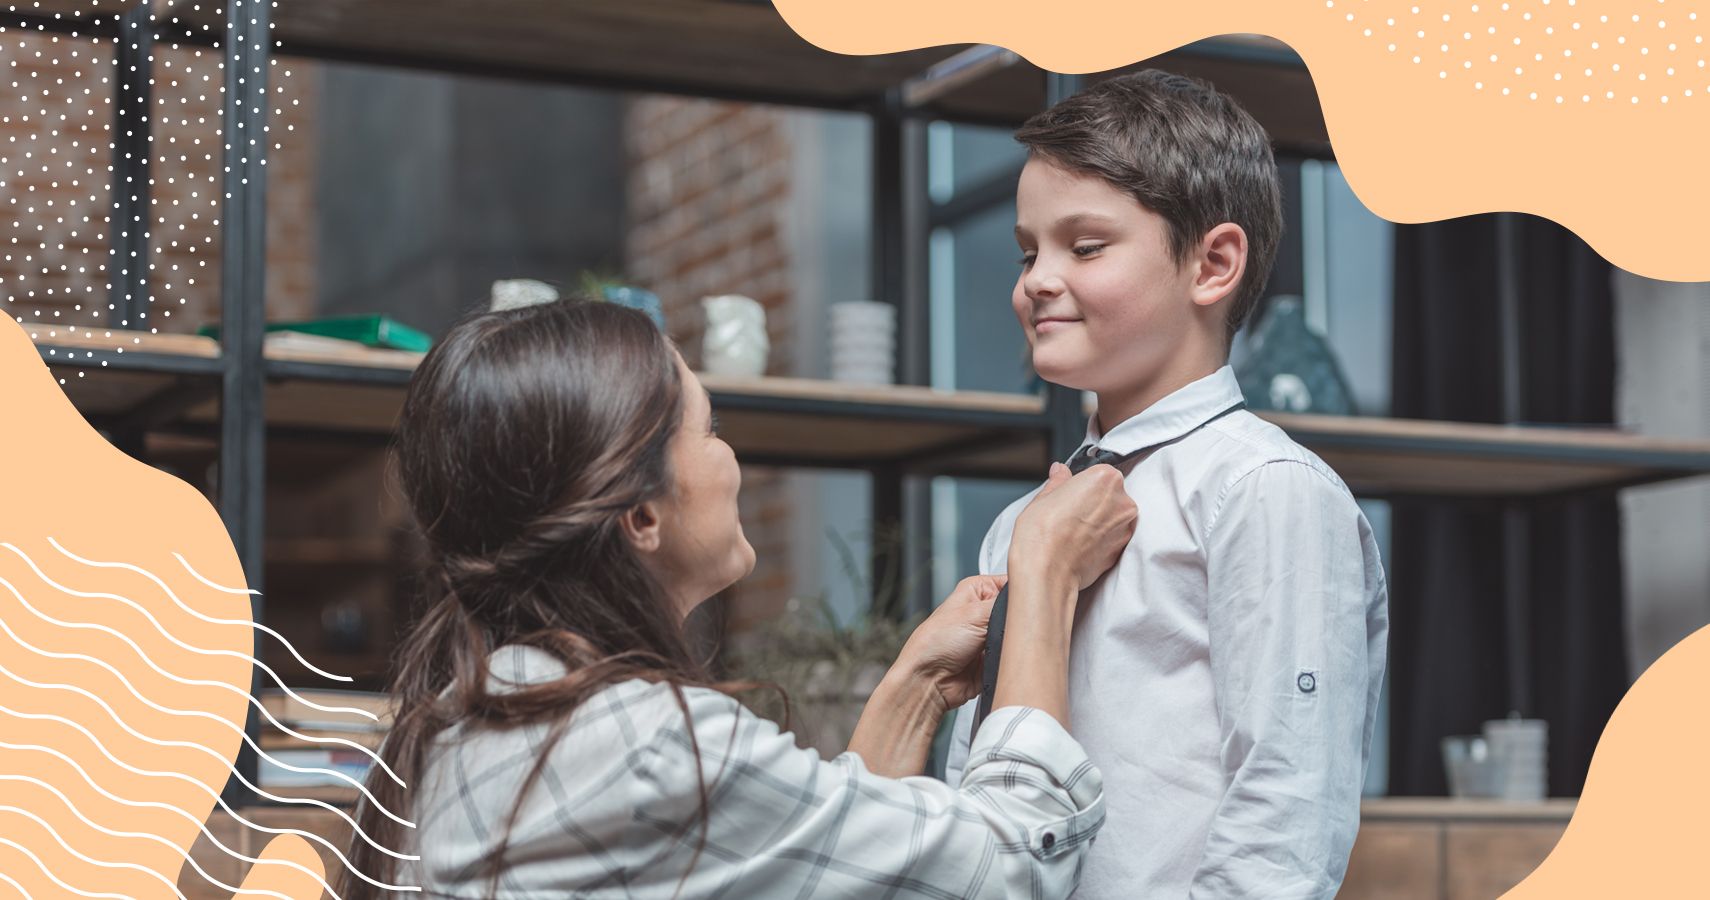 Teaching Your Child How To Tie A Tie